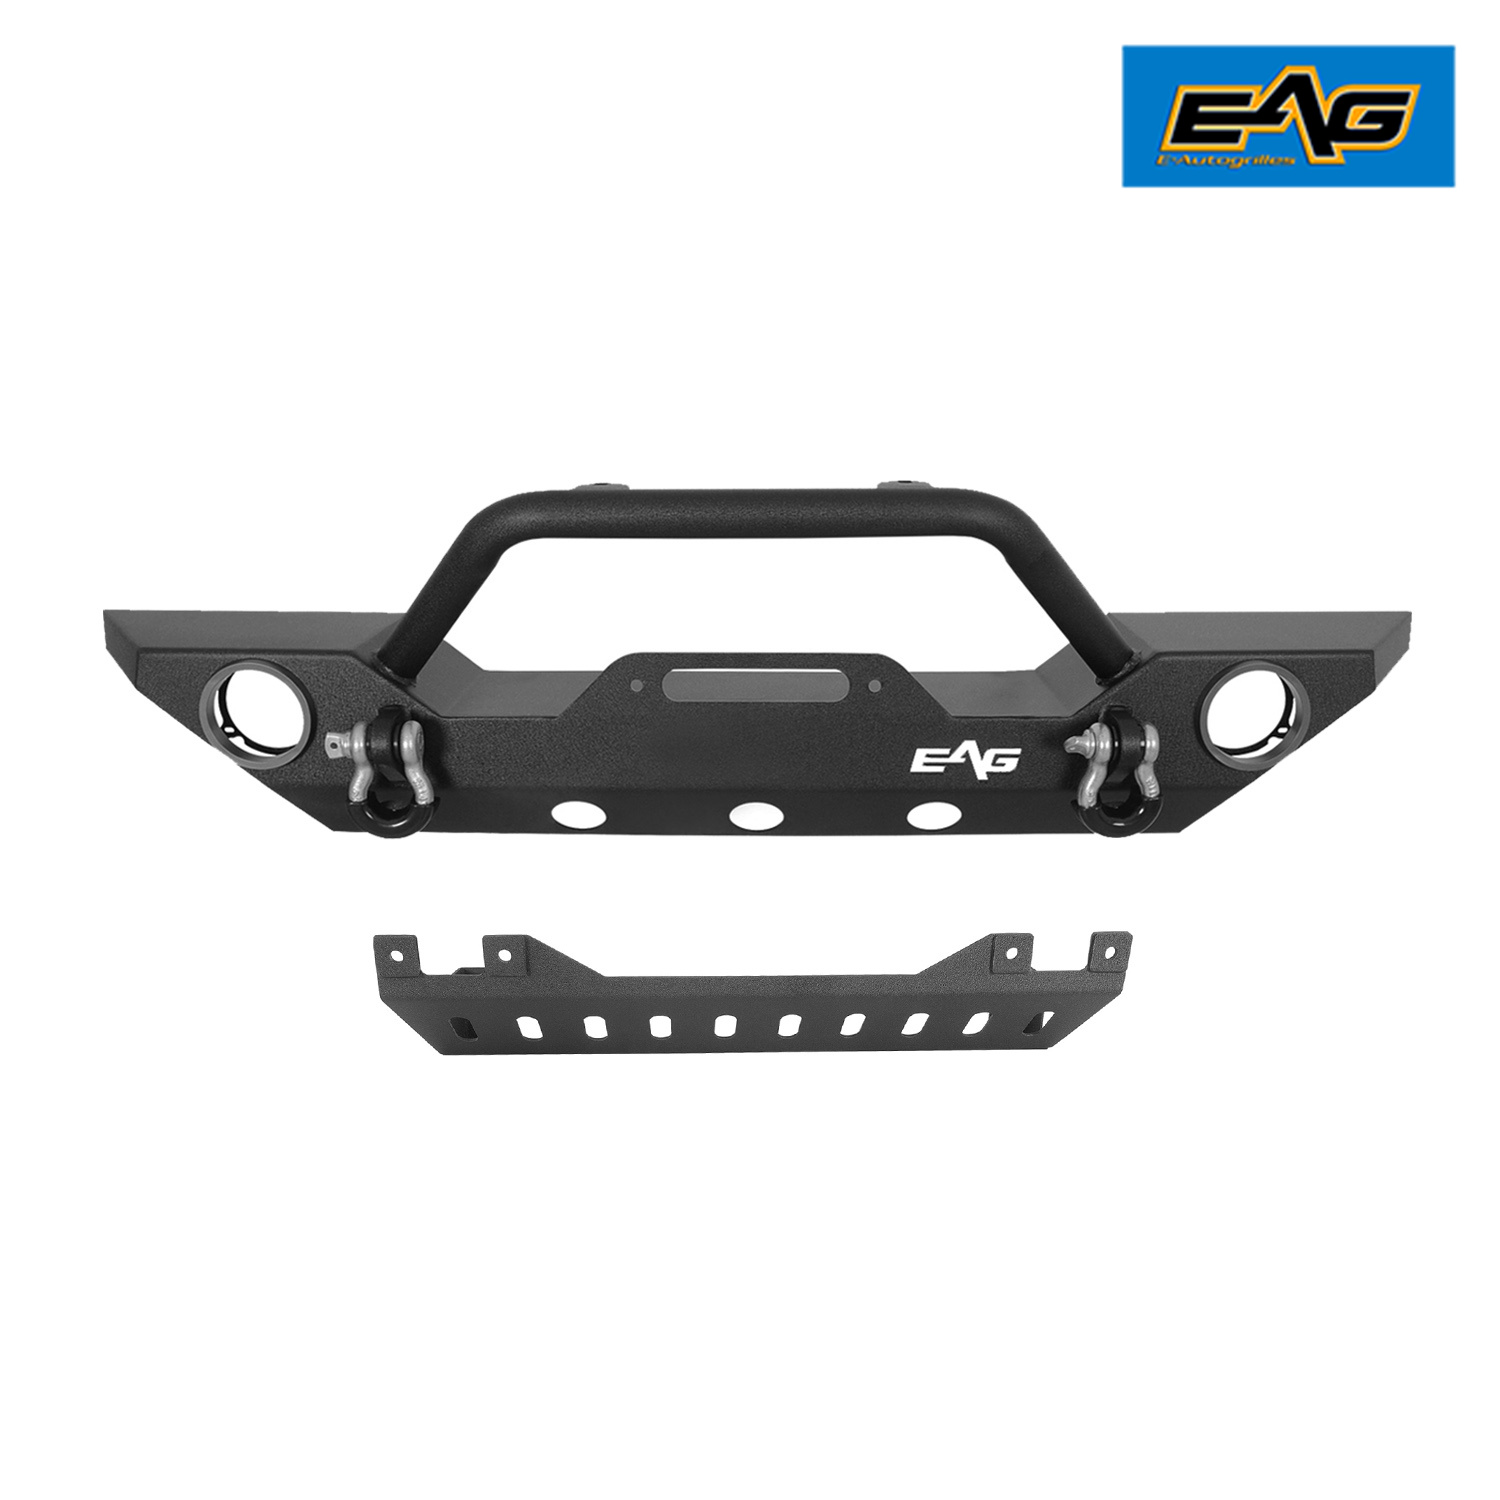 EAG Front Bumper Rock Crawler with Lower Skid Plate and Winch